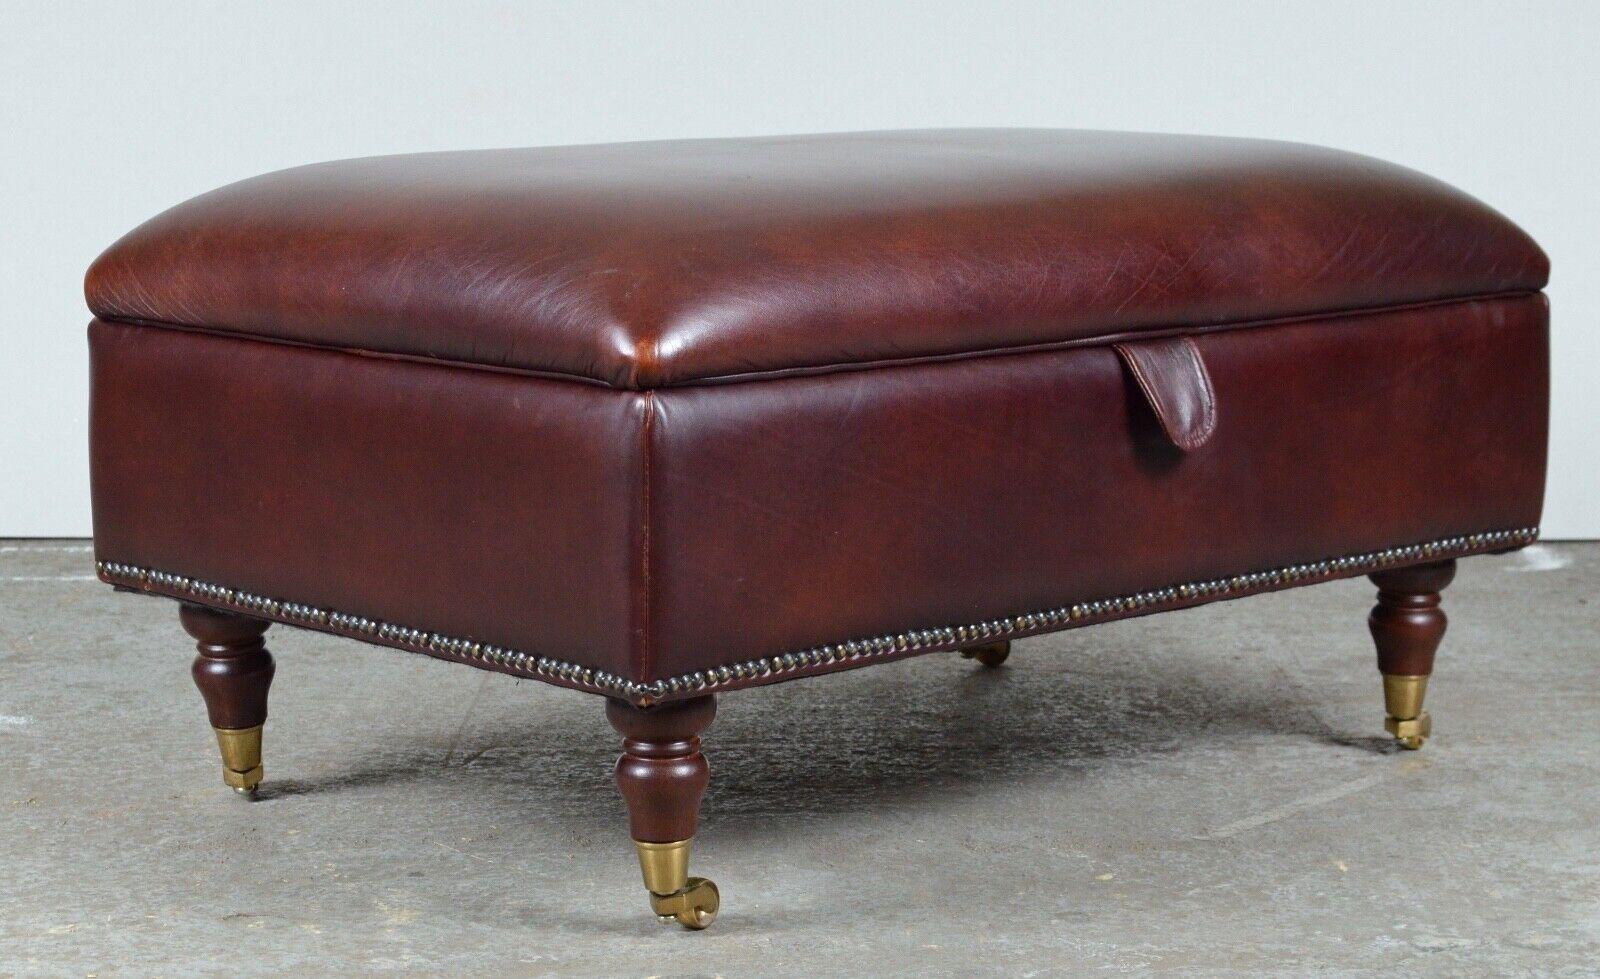 Country Large Laura Ashley Elliot Heritage Brown Leather Footstool Internal Storage